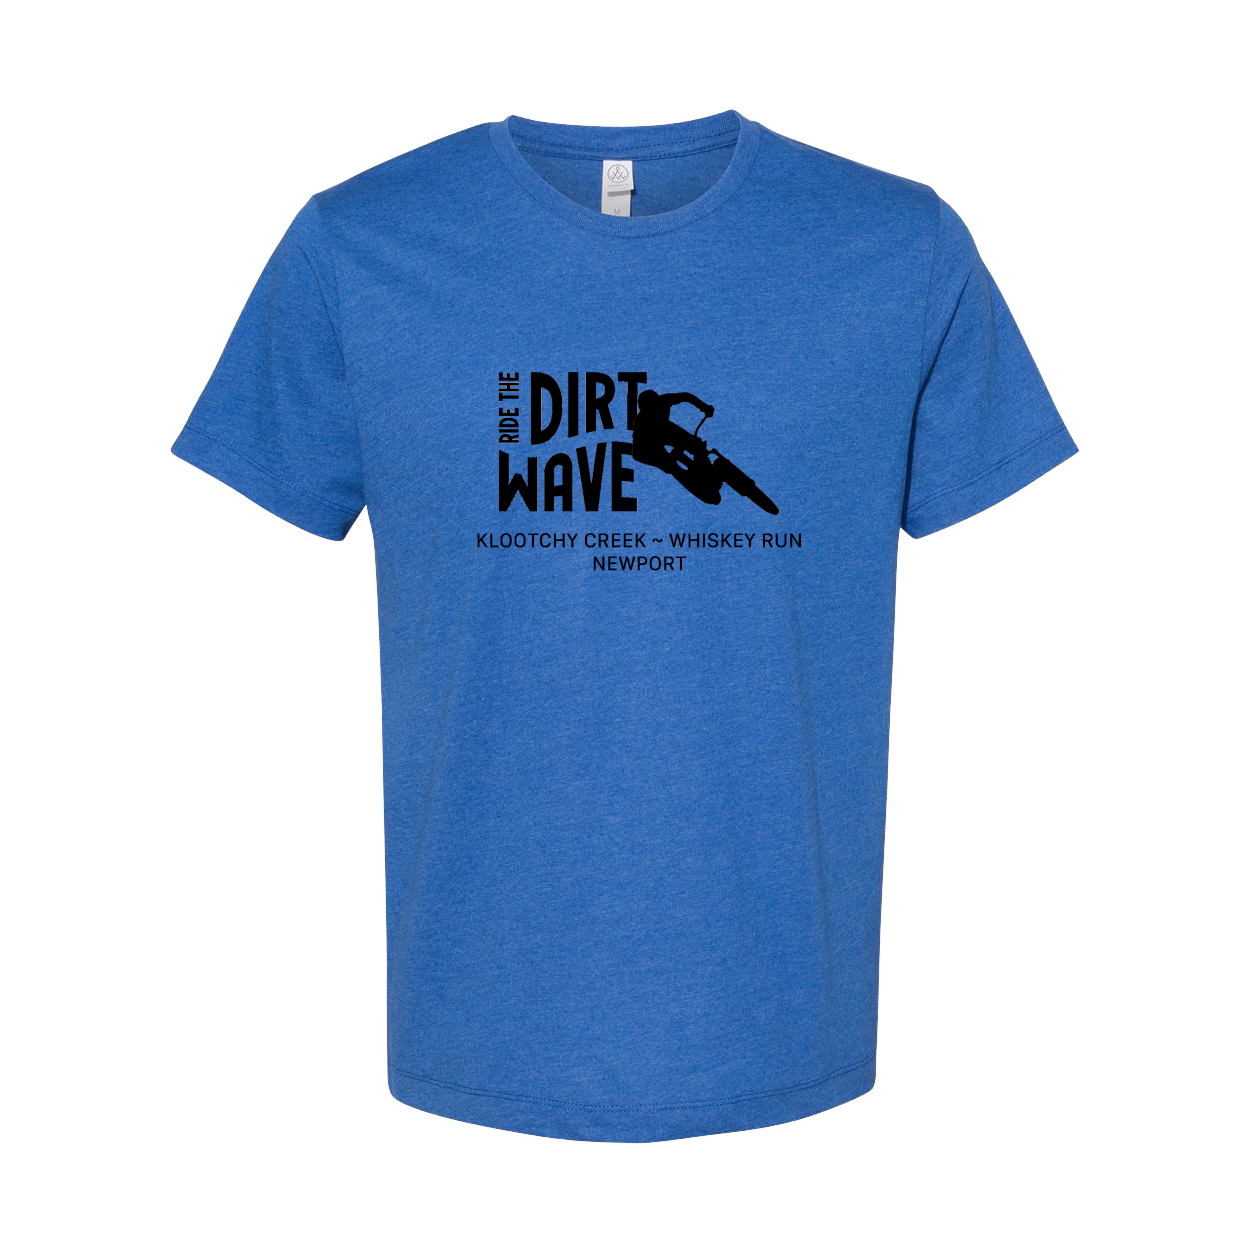 *Pre-order* Ride the Dirt Wave T-Shirt